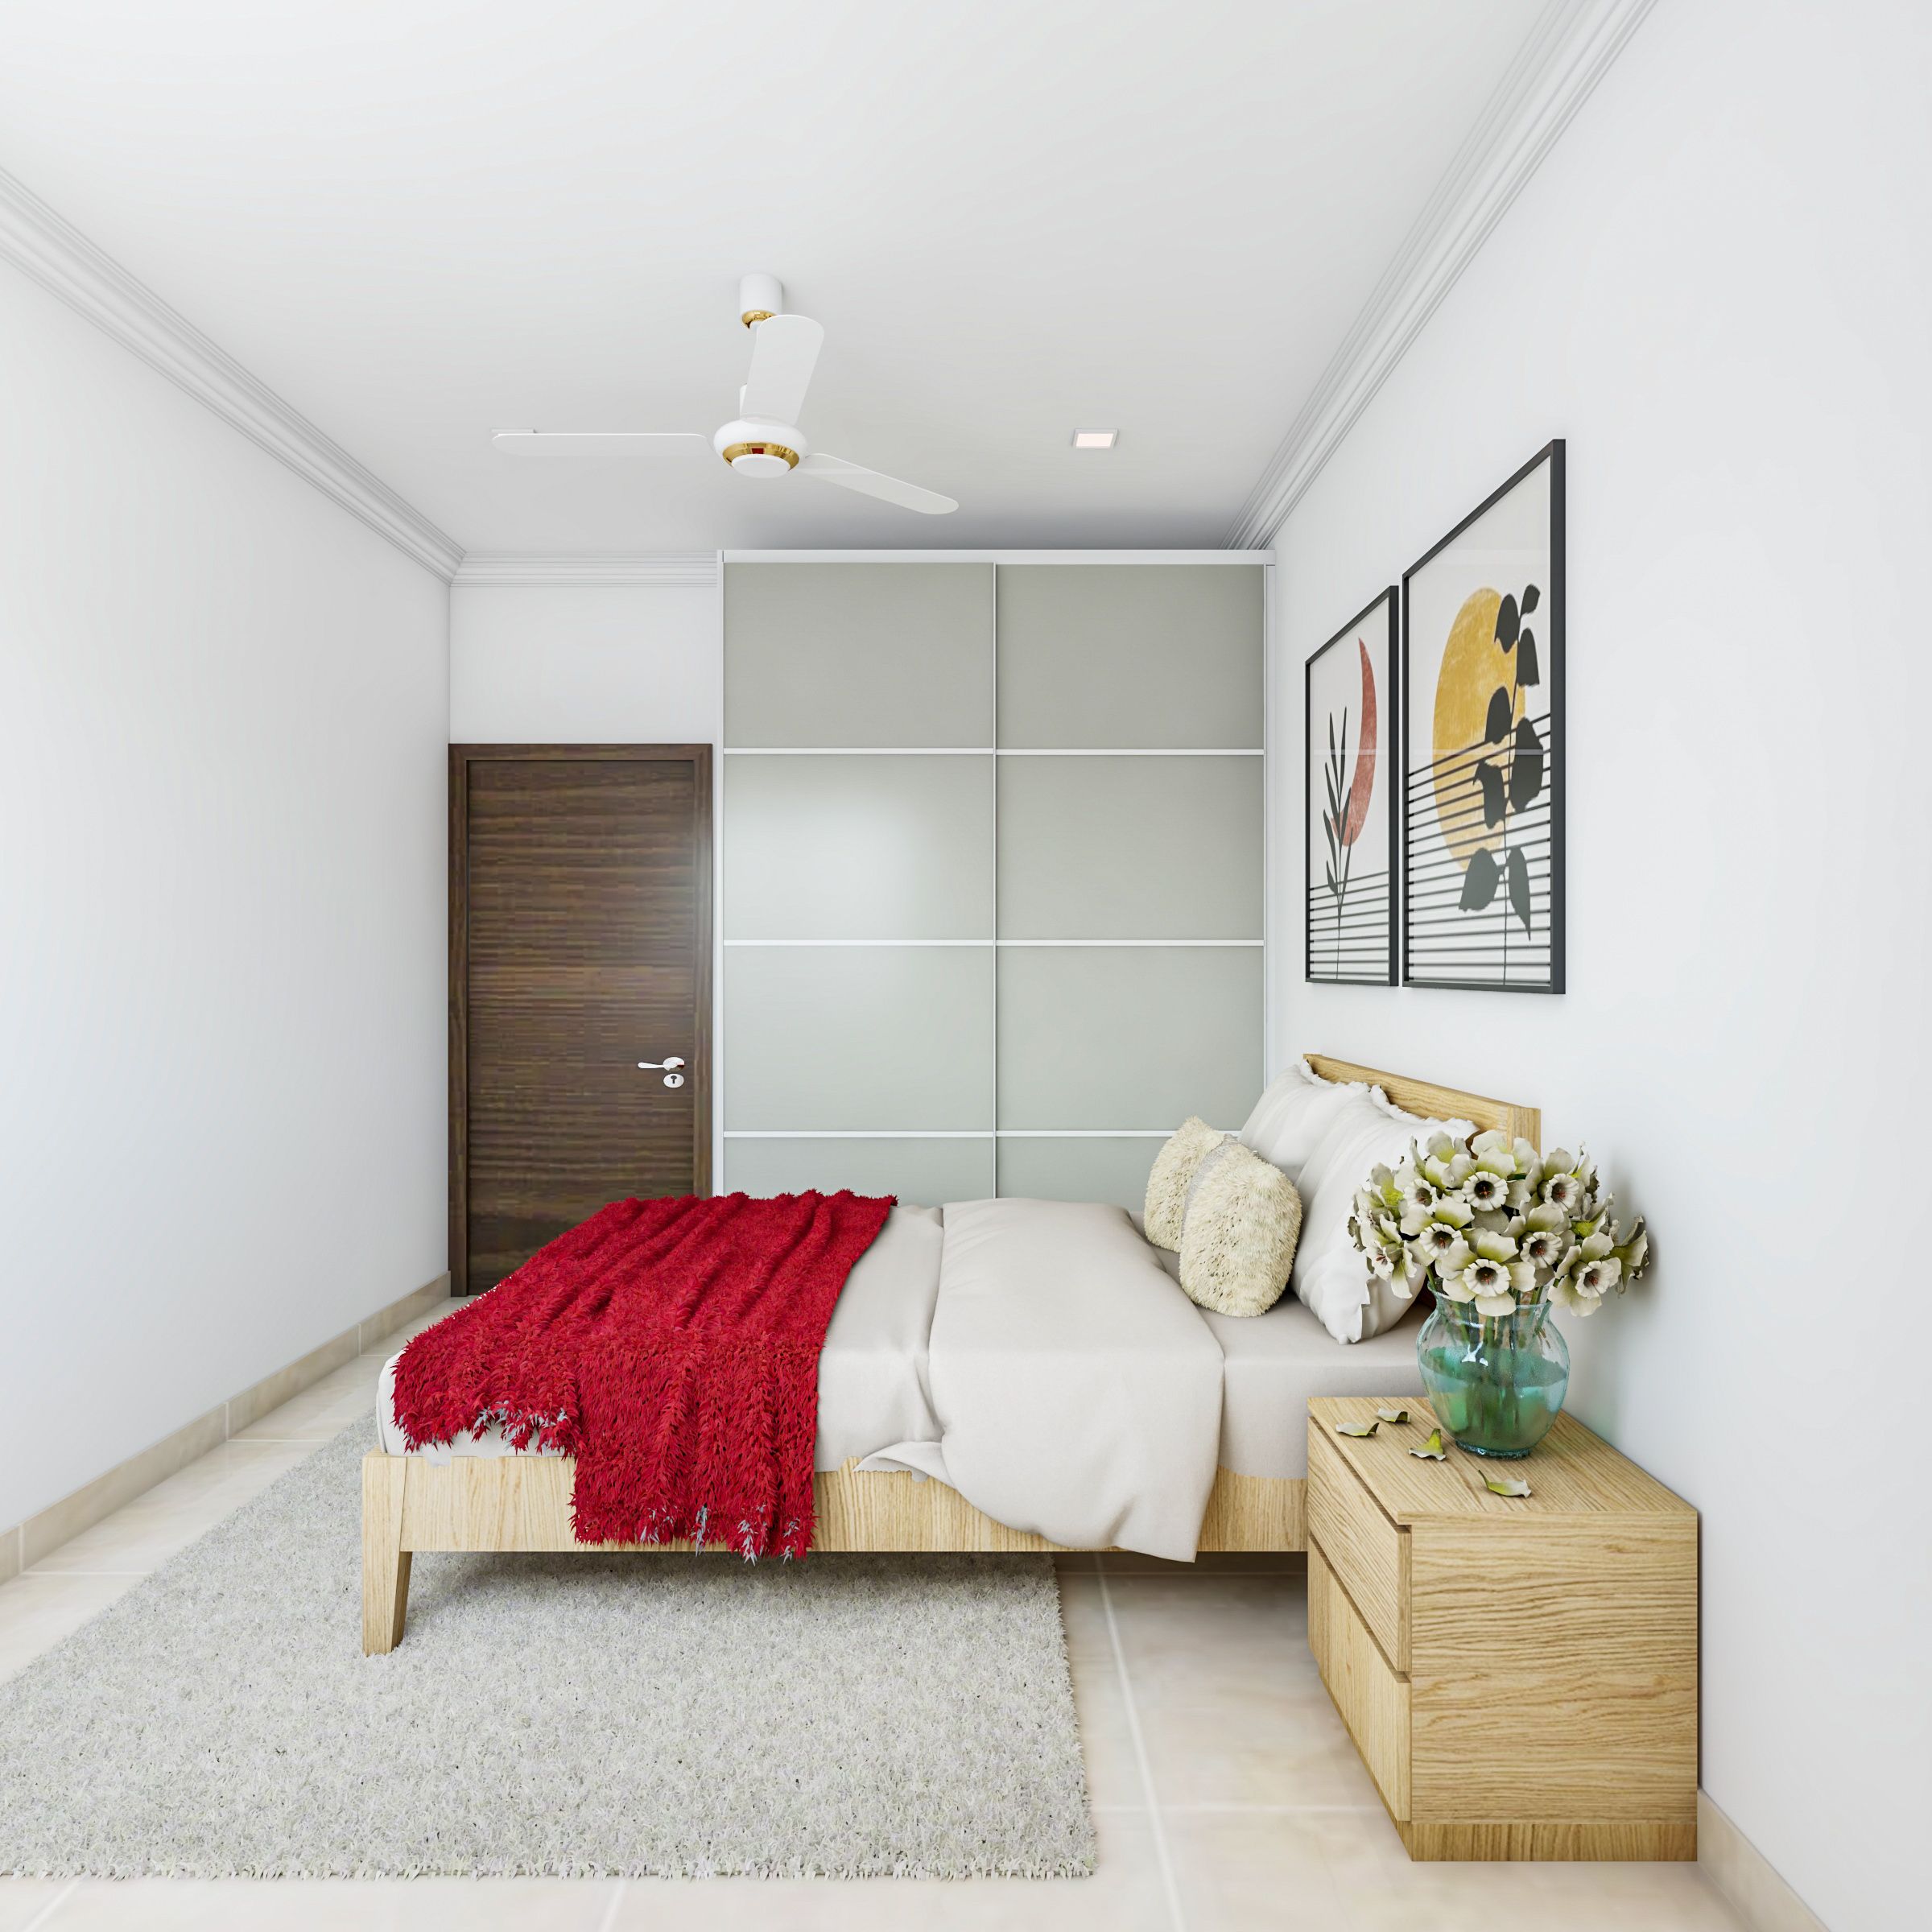 Compact Master Bedroom Design With Red Throw